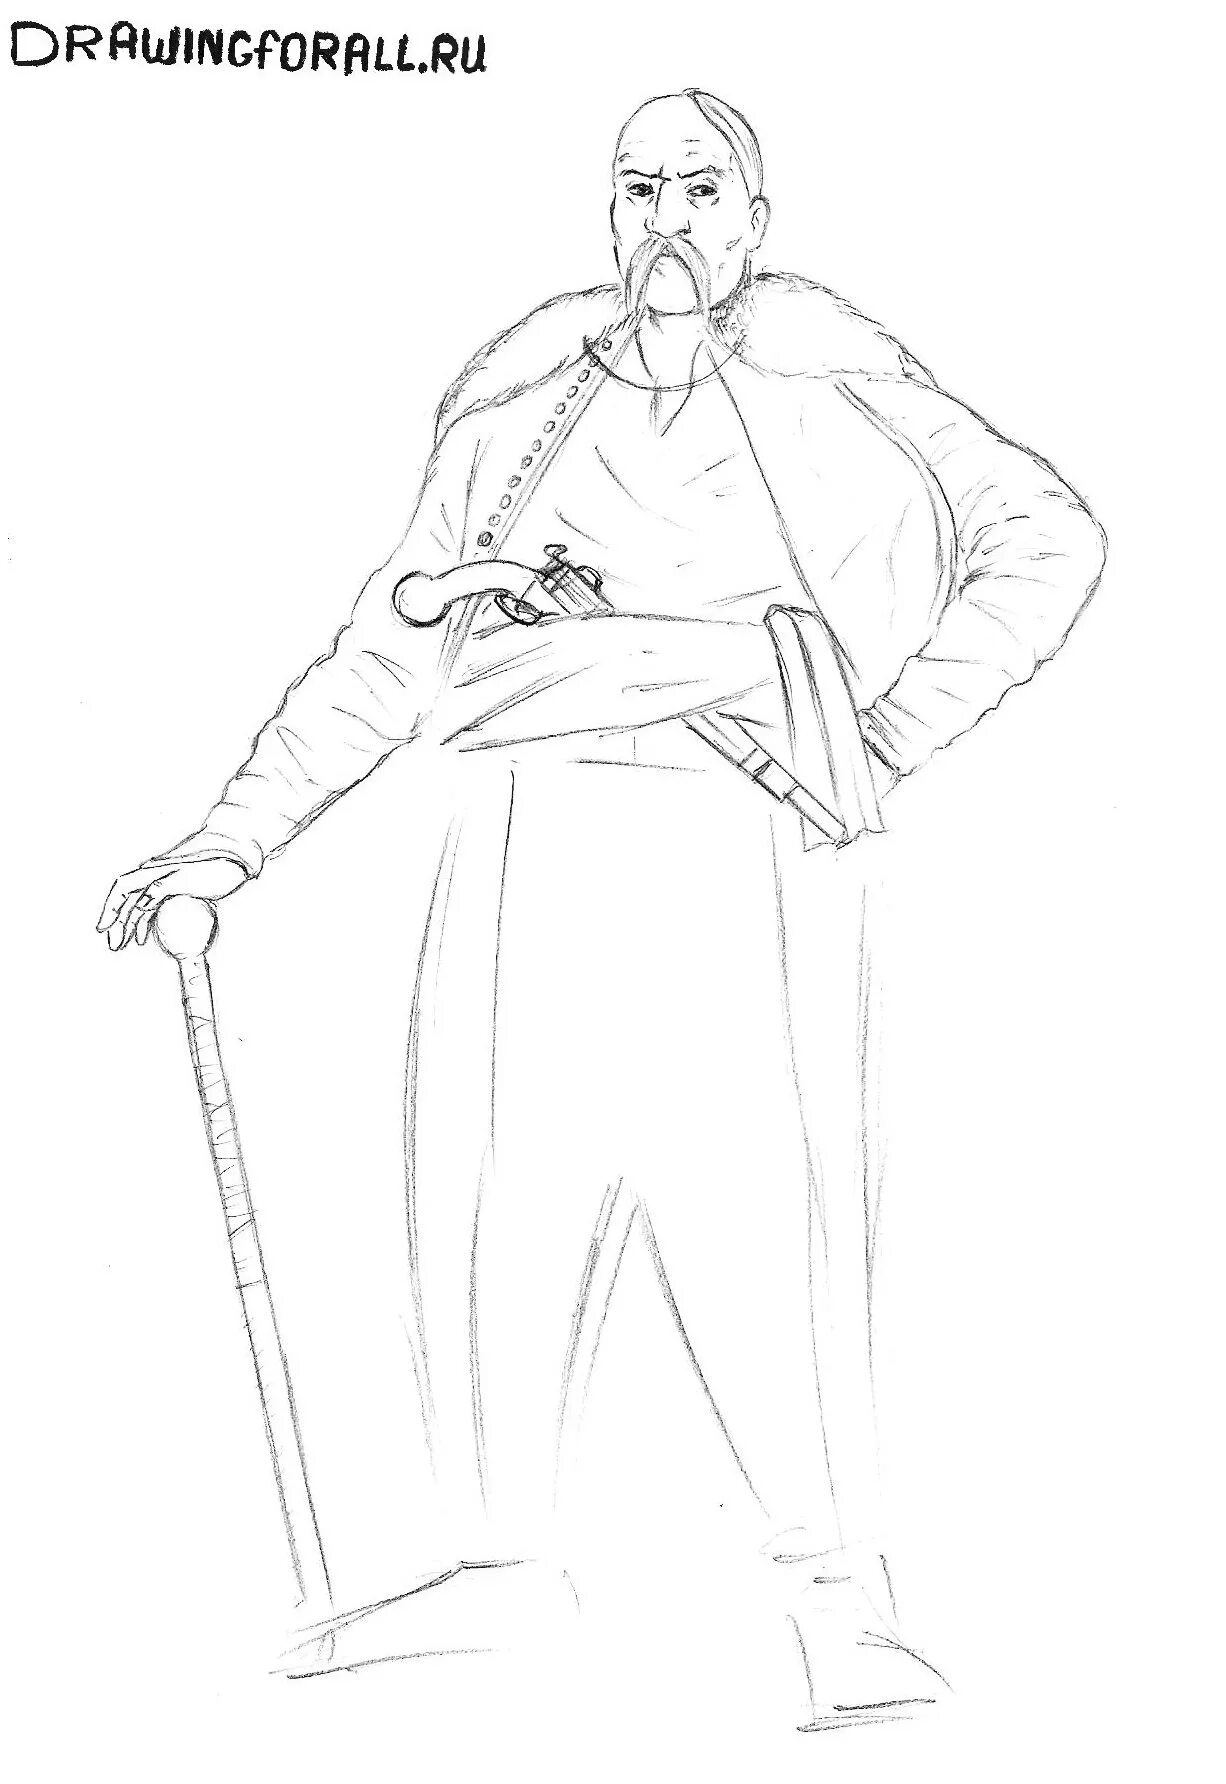 Cossack costume coloring page